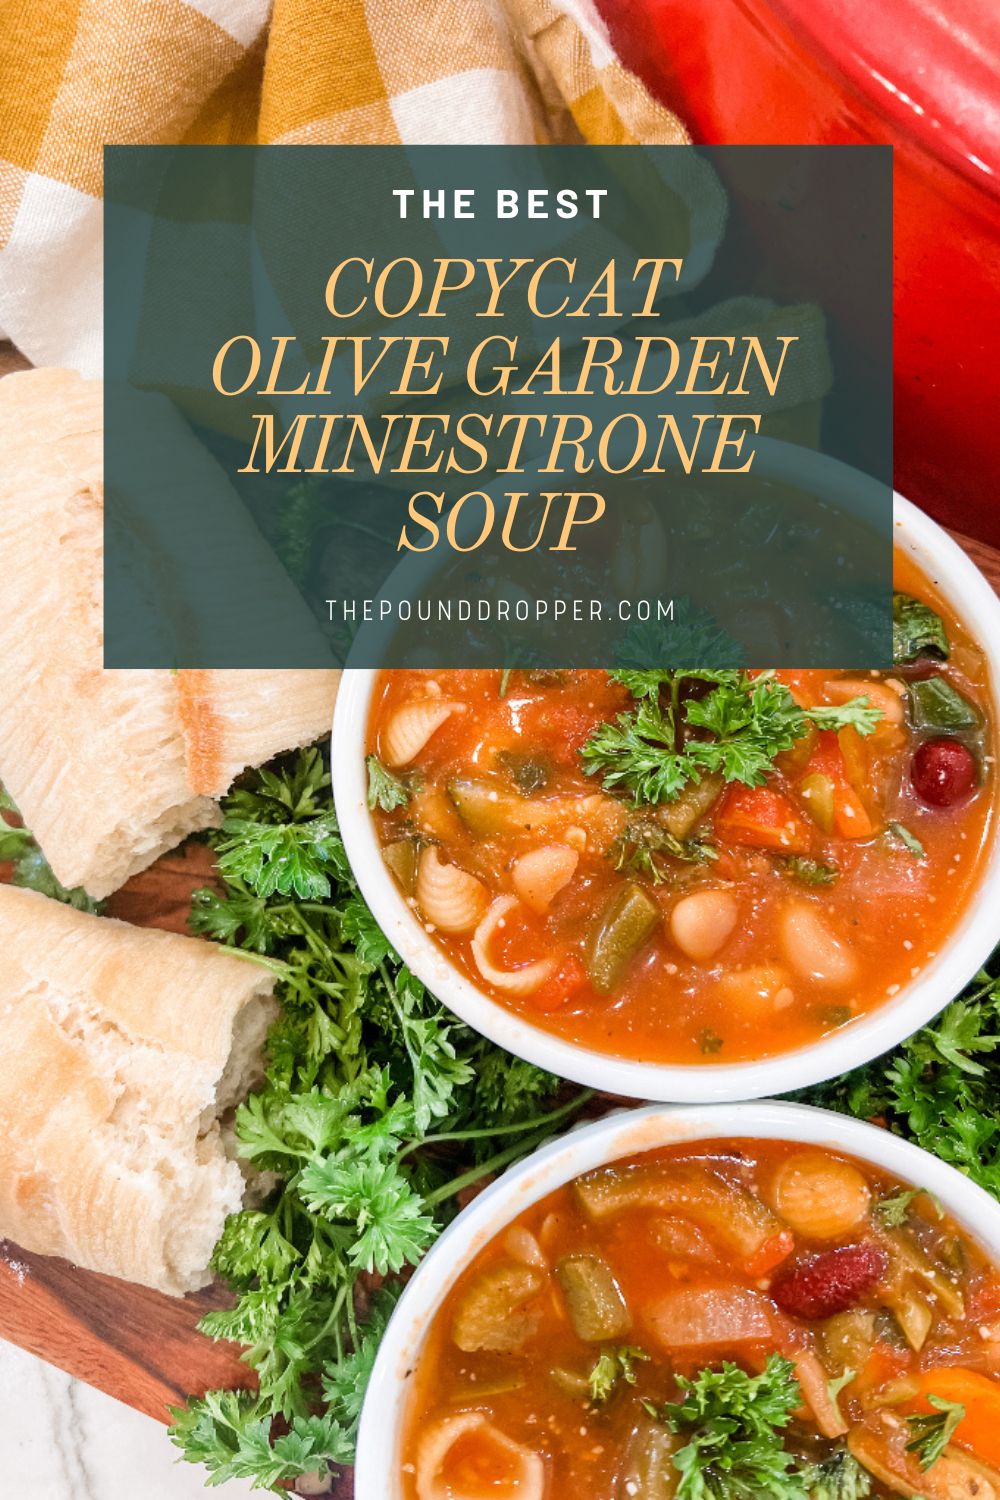 Serve up your favorite Olive Garden™ soup by making this Copycat Olive Garden Minestrone Soup at home. This hearty soup is made in one pot and takes less than 30 minutes to make. It’s a copycat of the restaurant version that tastes even better than the original recipe! Made with lots of fresh vegetables, beans, shell pasta, and in a light tomato broth. via @pounddropper